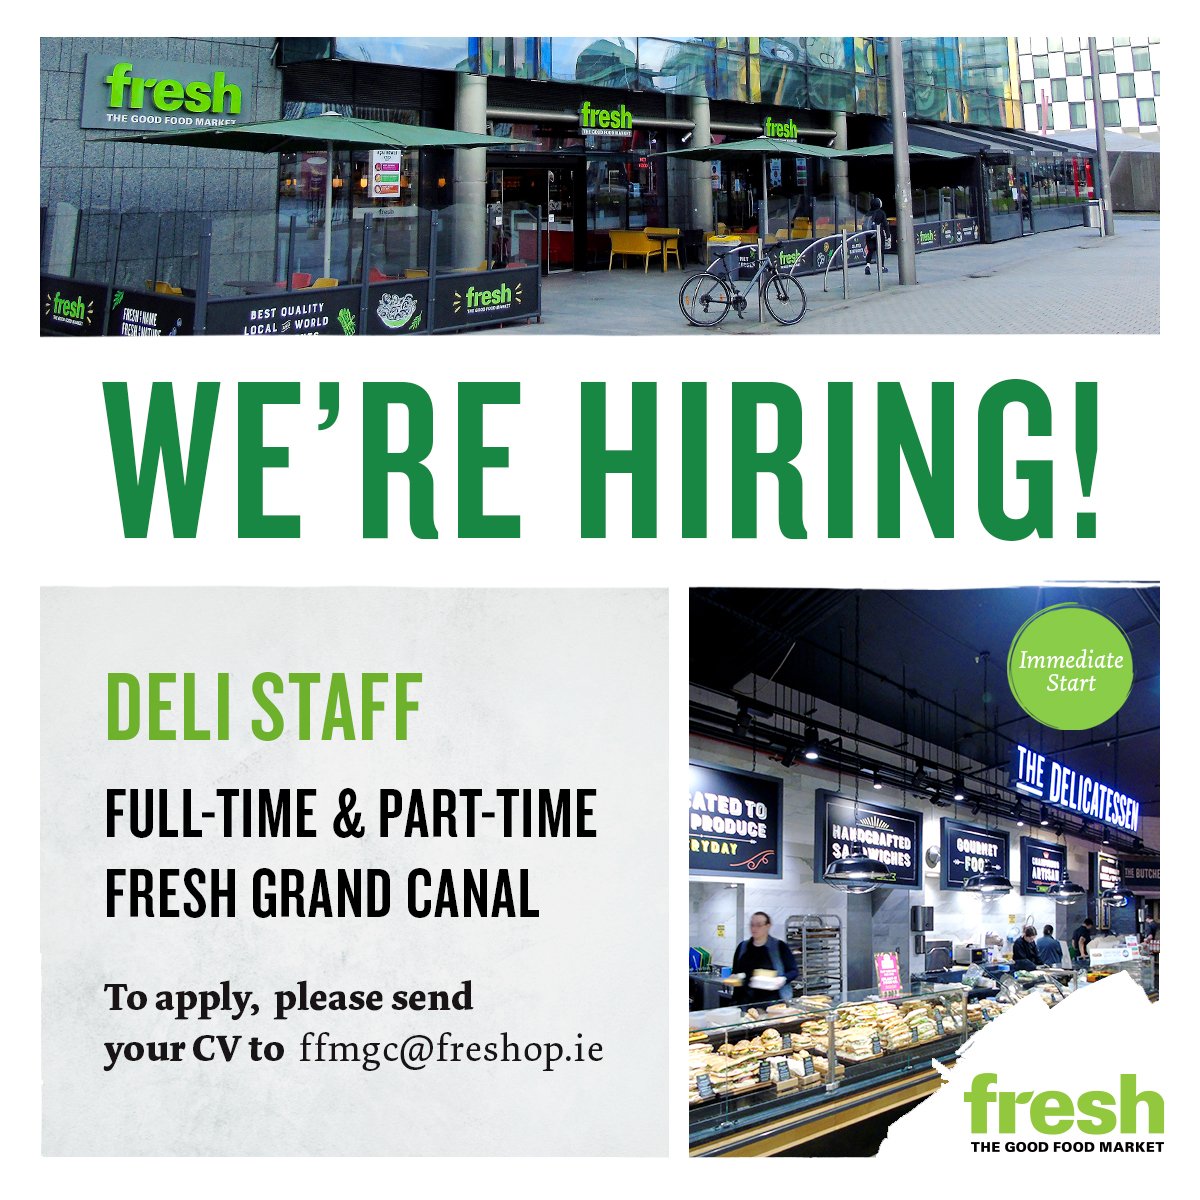 🌟 Join our team! 🌟
Fresh Grand Canal is hiring Deli Staff for both full-time and part-time positions! If you're passionate about food and customer service, we want to hear from you! 

To apply, please send your CV to ffmgc@freshop.ie

#DublinJobs #IrishJobs